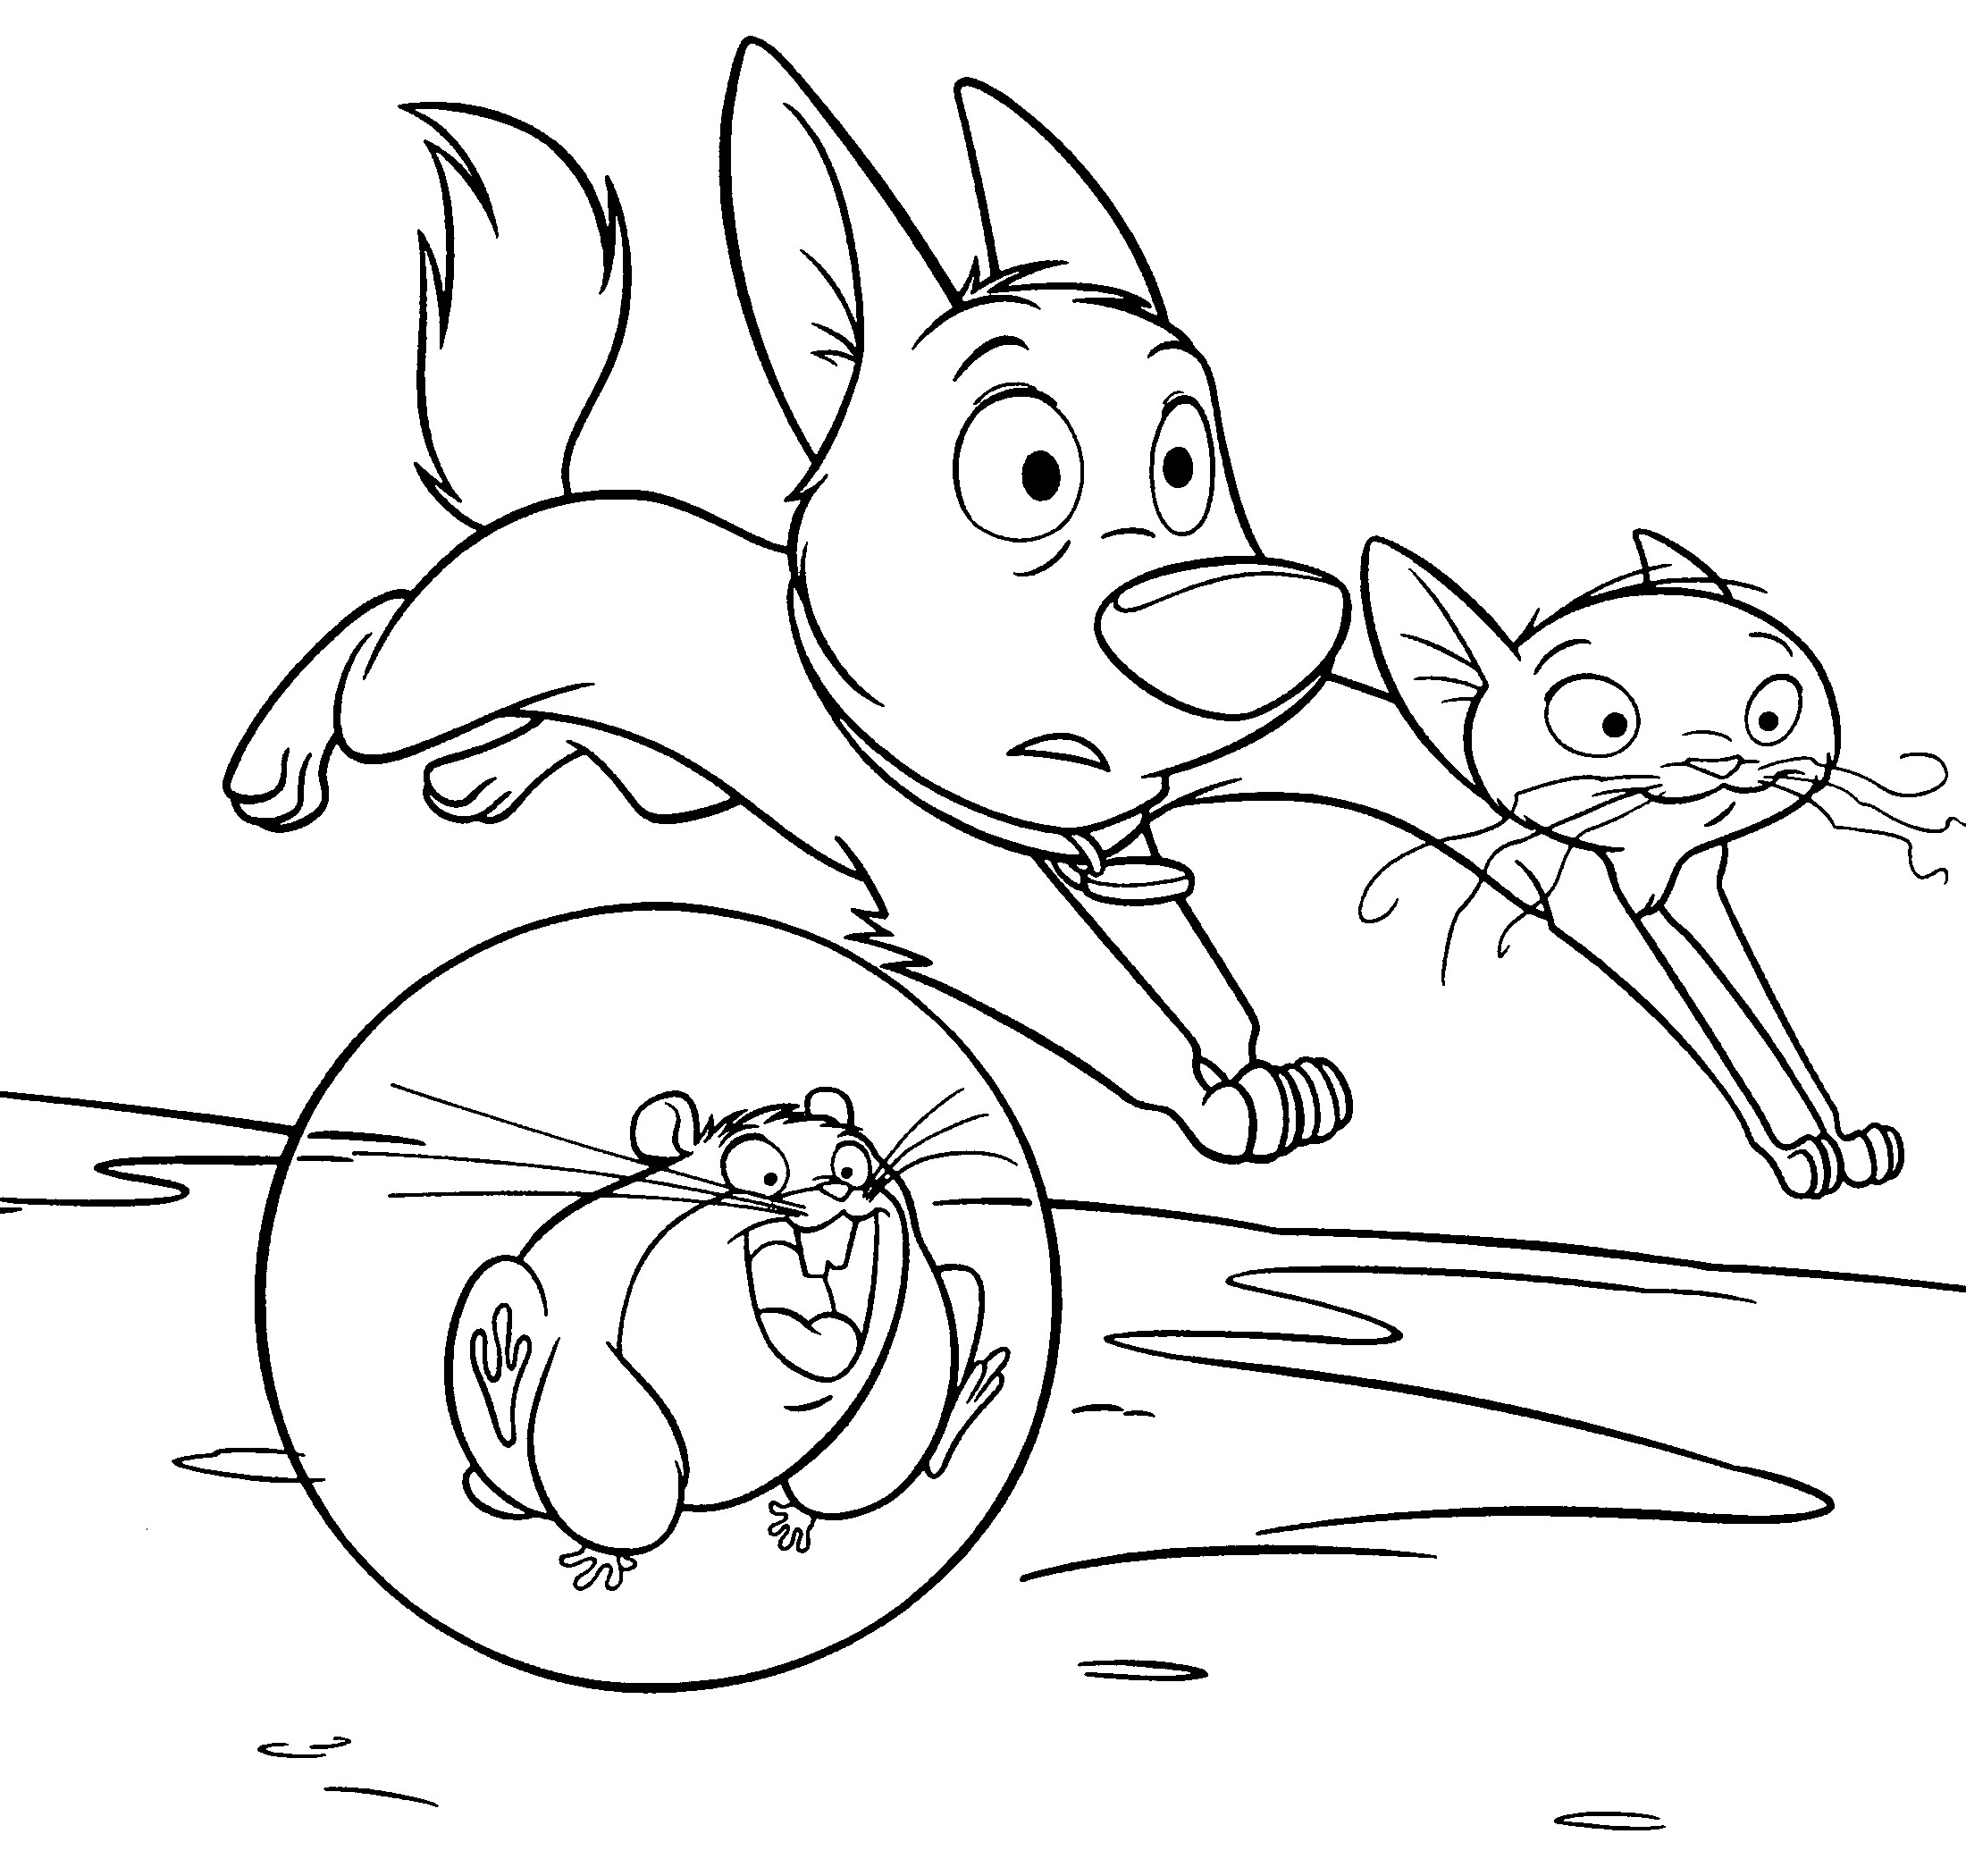 Bolt’s Cute Gang Coloring Page